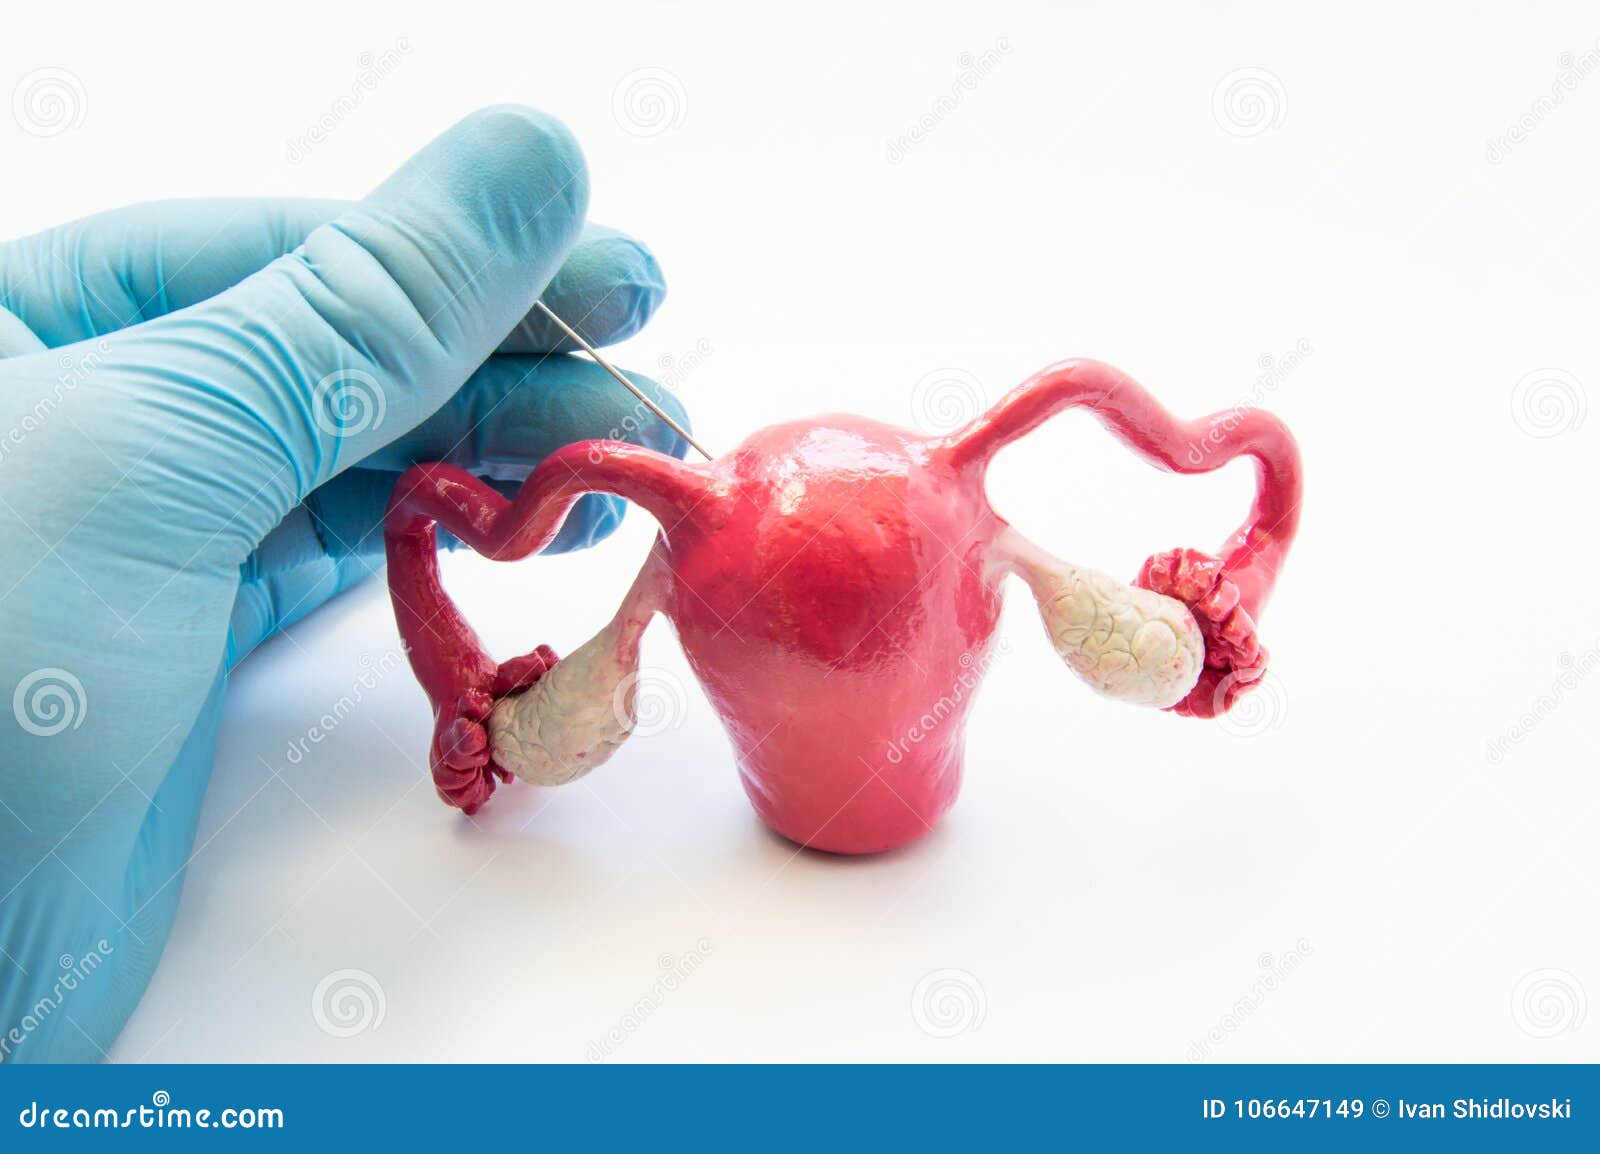 concept photo of gynecological surgical procedure of biopsy female reproductive organs and tissues - uterine, endometrium or ovari